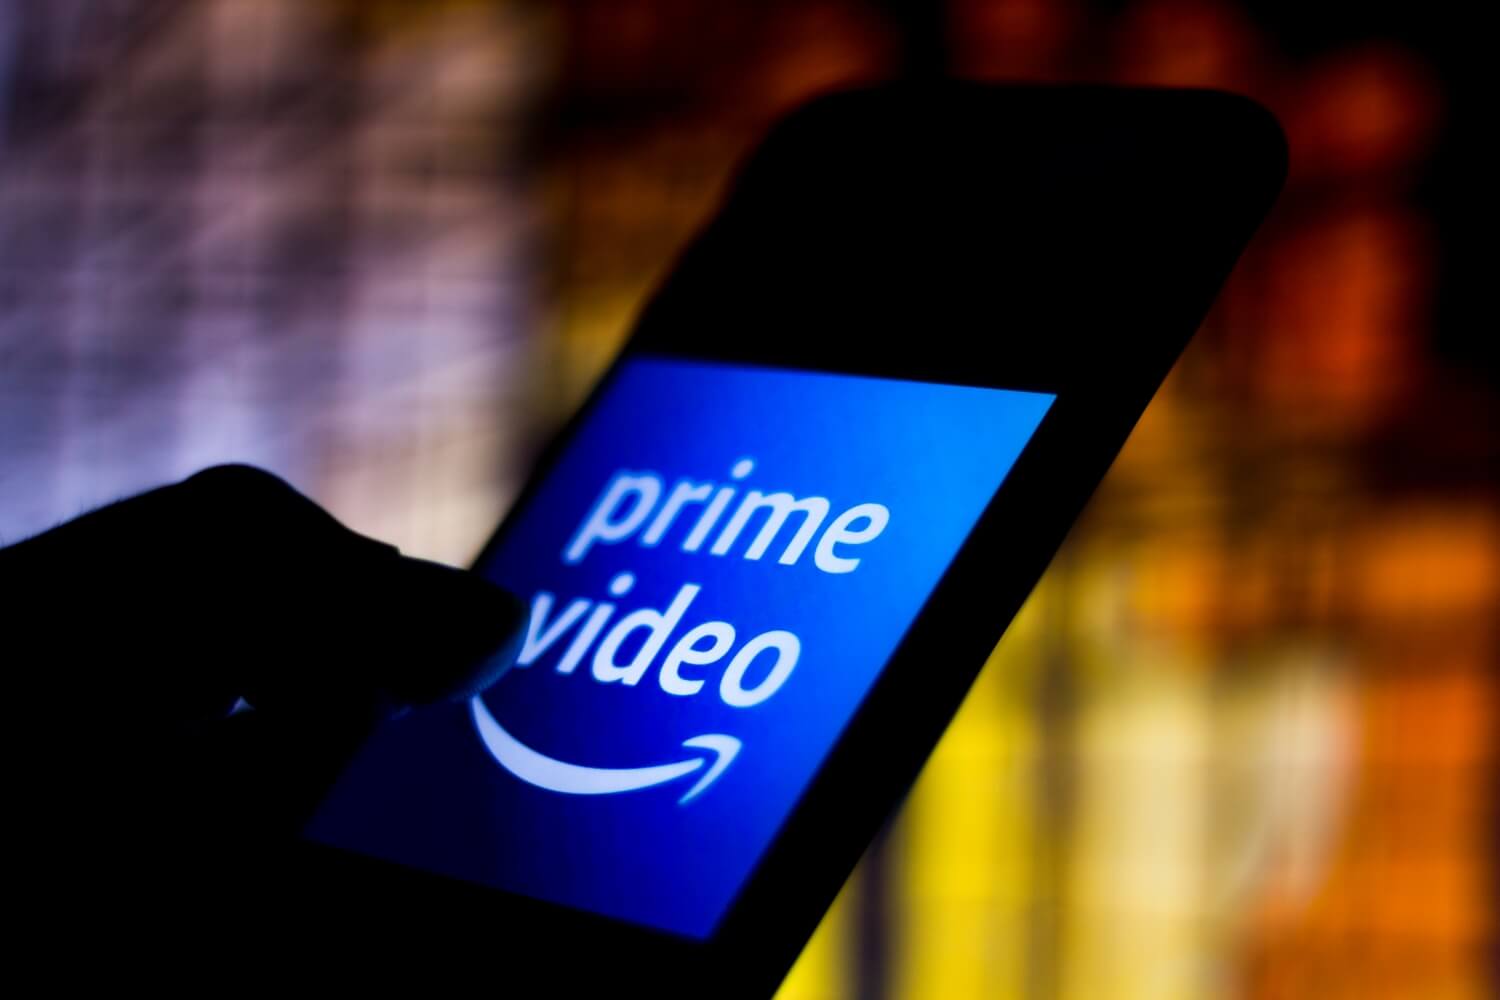 Amazon could boost Prime Video with the addition of live TV